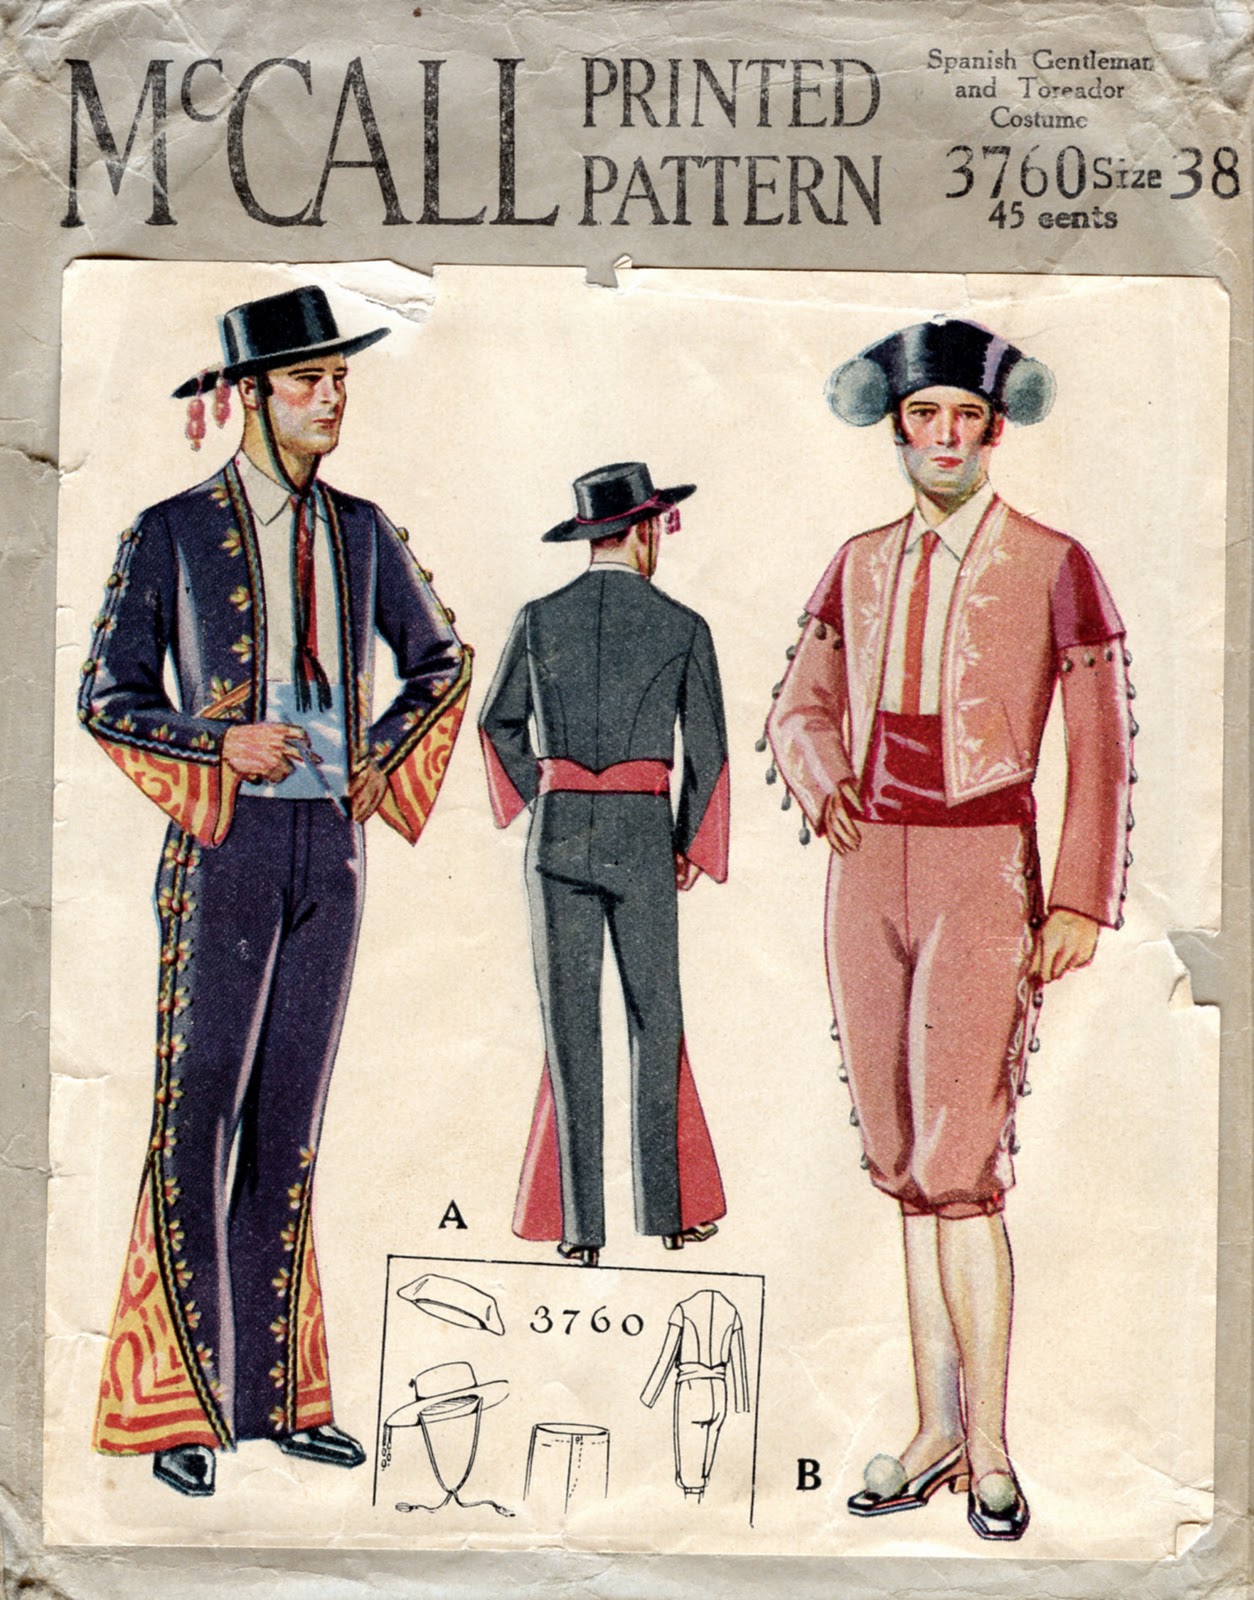 Adult Costume Patterns - Vintage Sewing Patterns | Heavens To Betsy